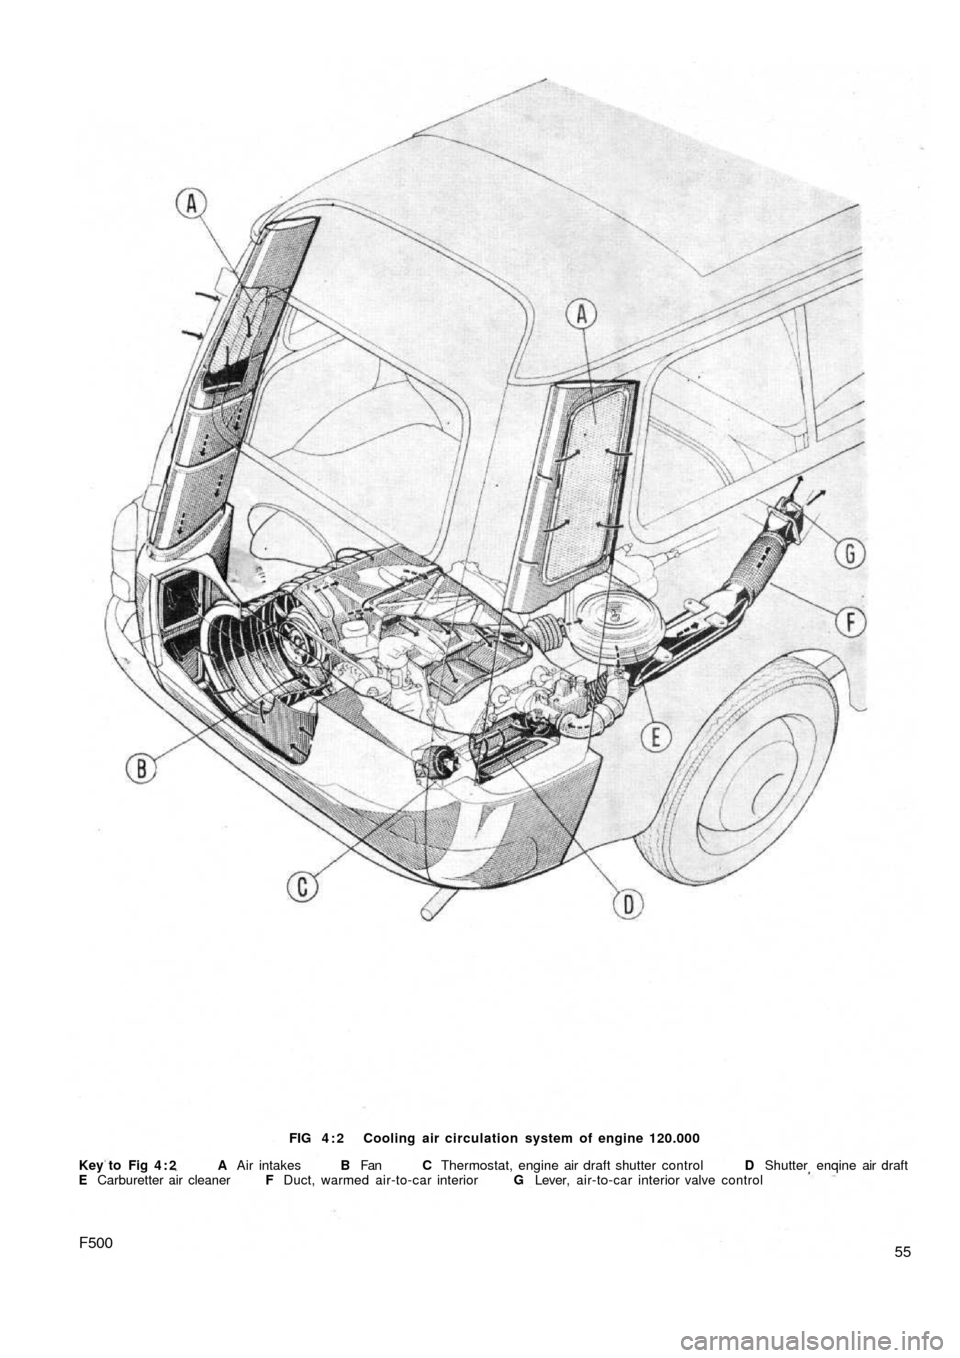 FIAT 500 1959 1.G Service Manual 55F500
FIG 4 : 2  Cooling air circulation system of engine 120.000
Key to  Fig  4 : 2  A Air intakes B Fan C  Thermostat, engine air draft shutter control D Shutter enqine air draft
E Carburetter air 